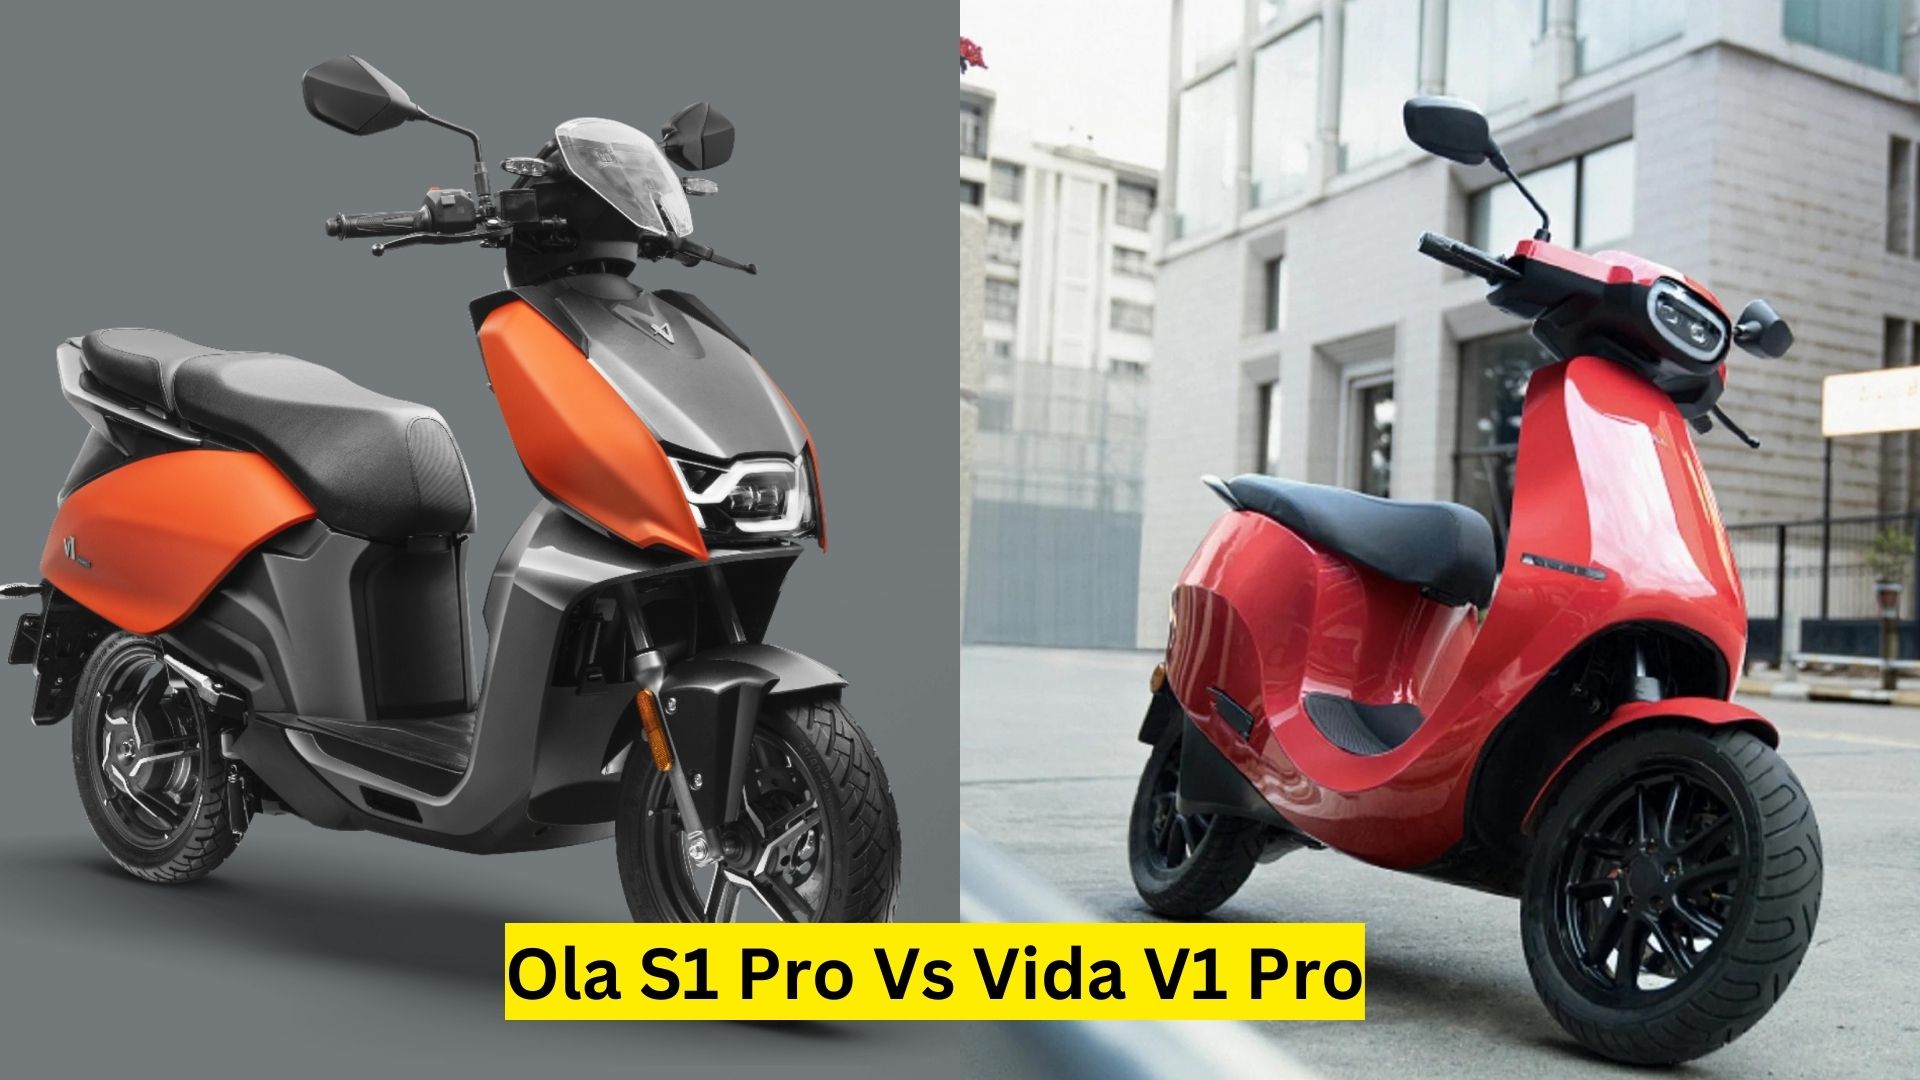 Ola S1 Pro Vs Vida V1 Pro: Which is Best Electric Scooter?